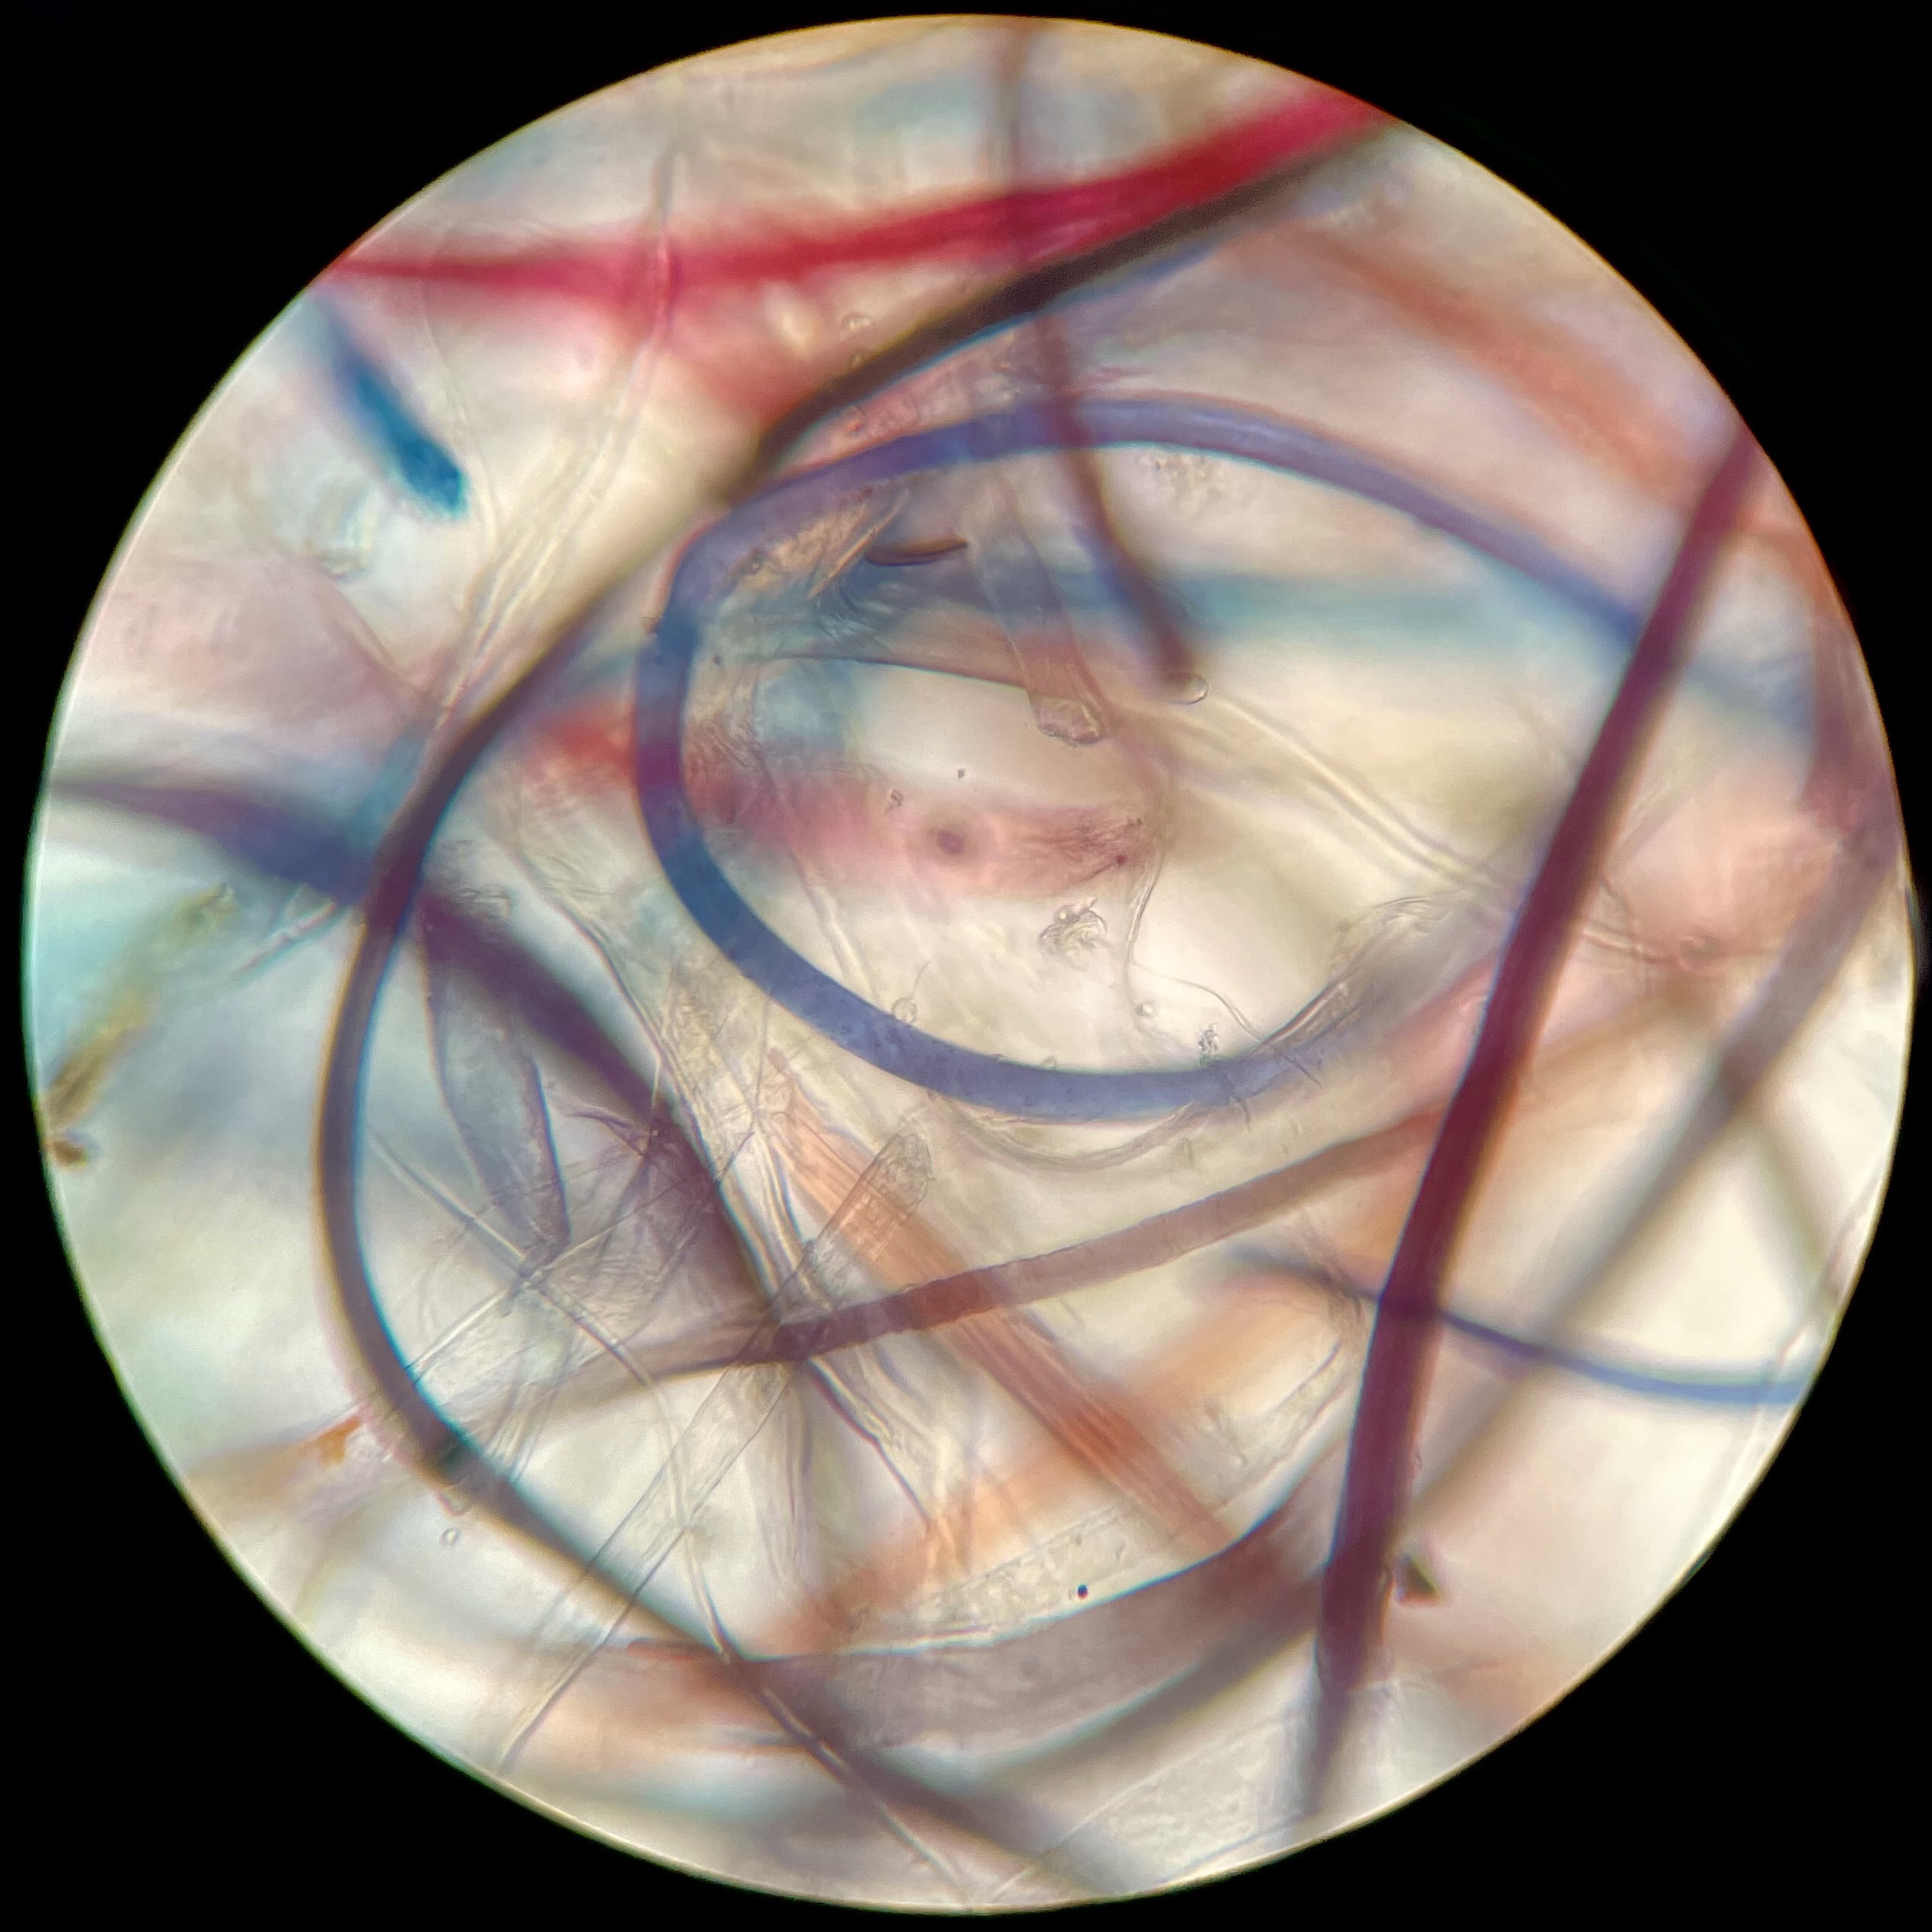 A microscopic view of blue and red colorful fibers